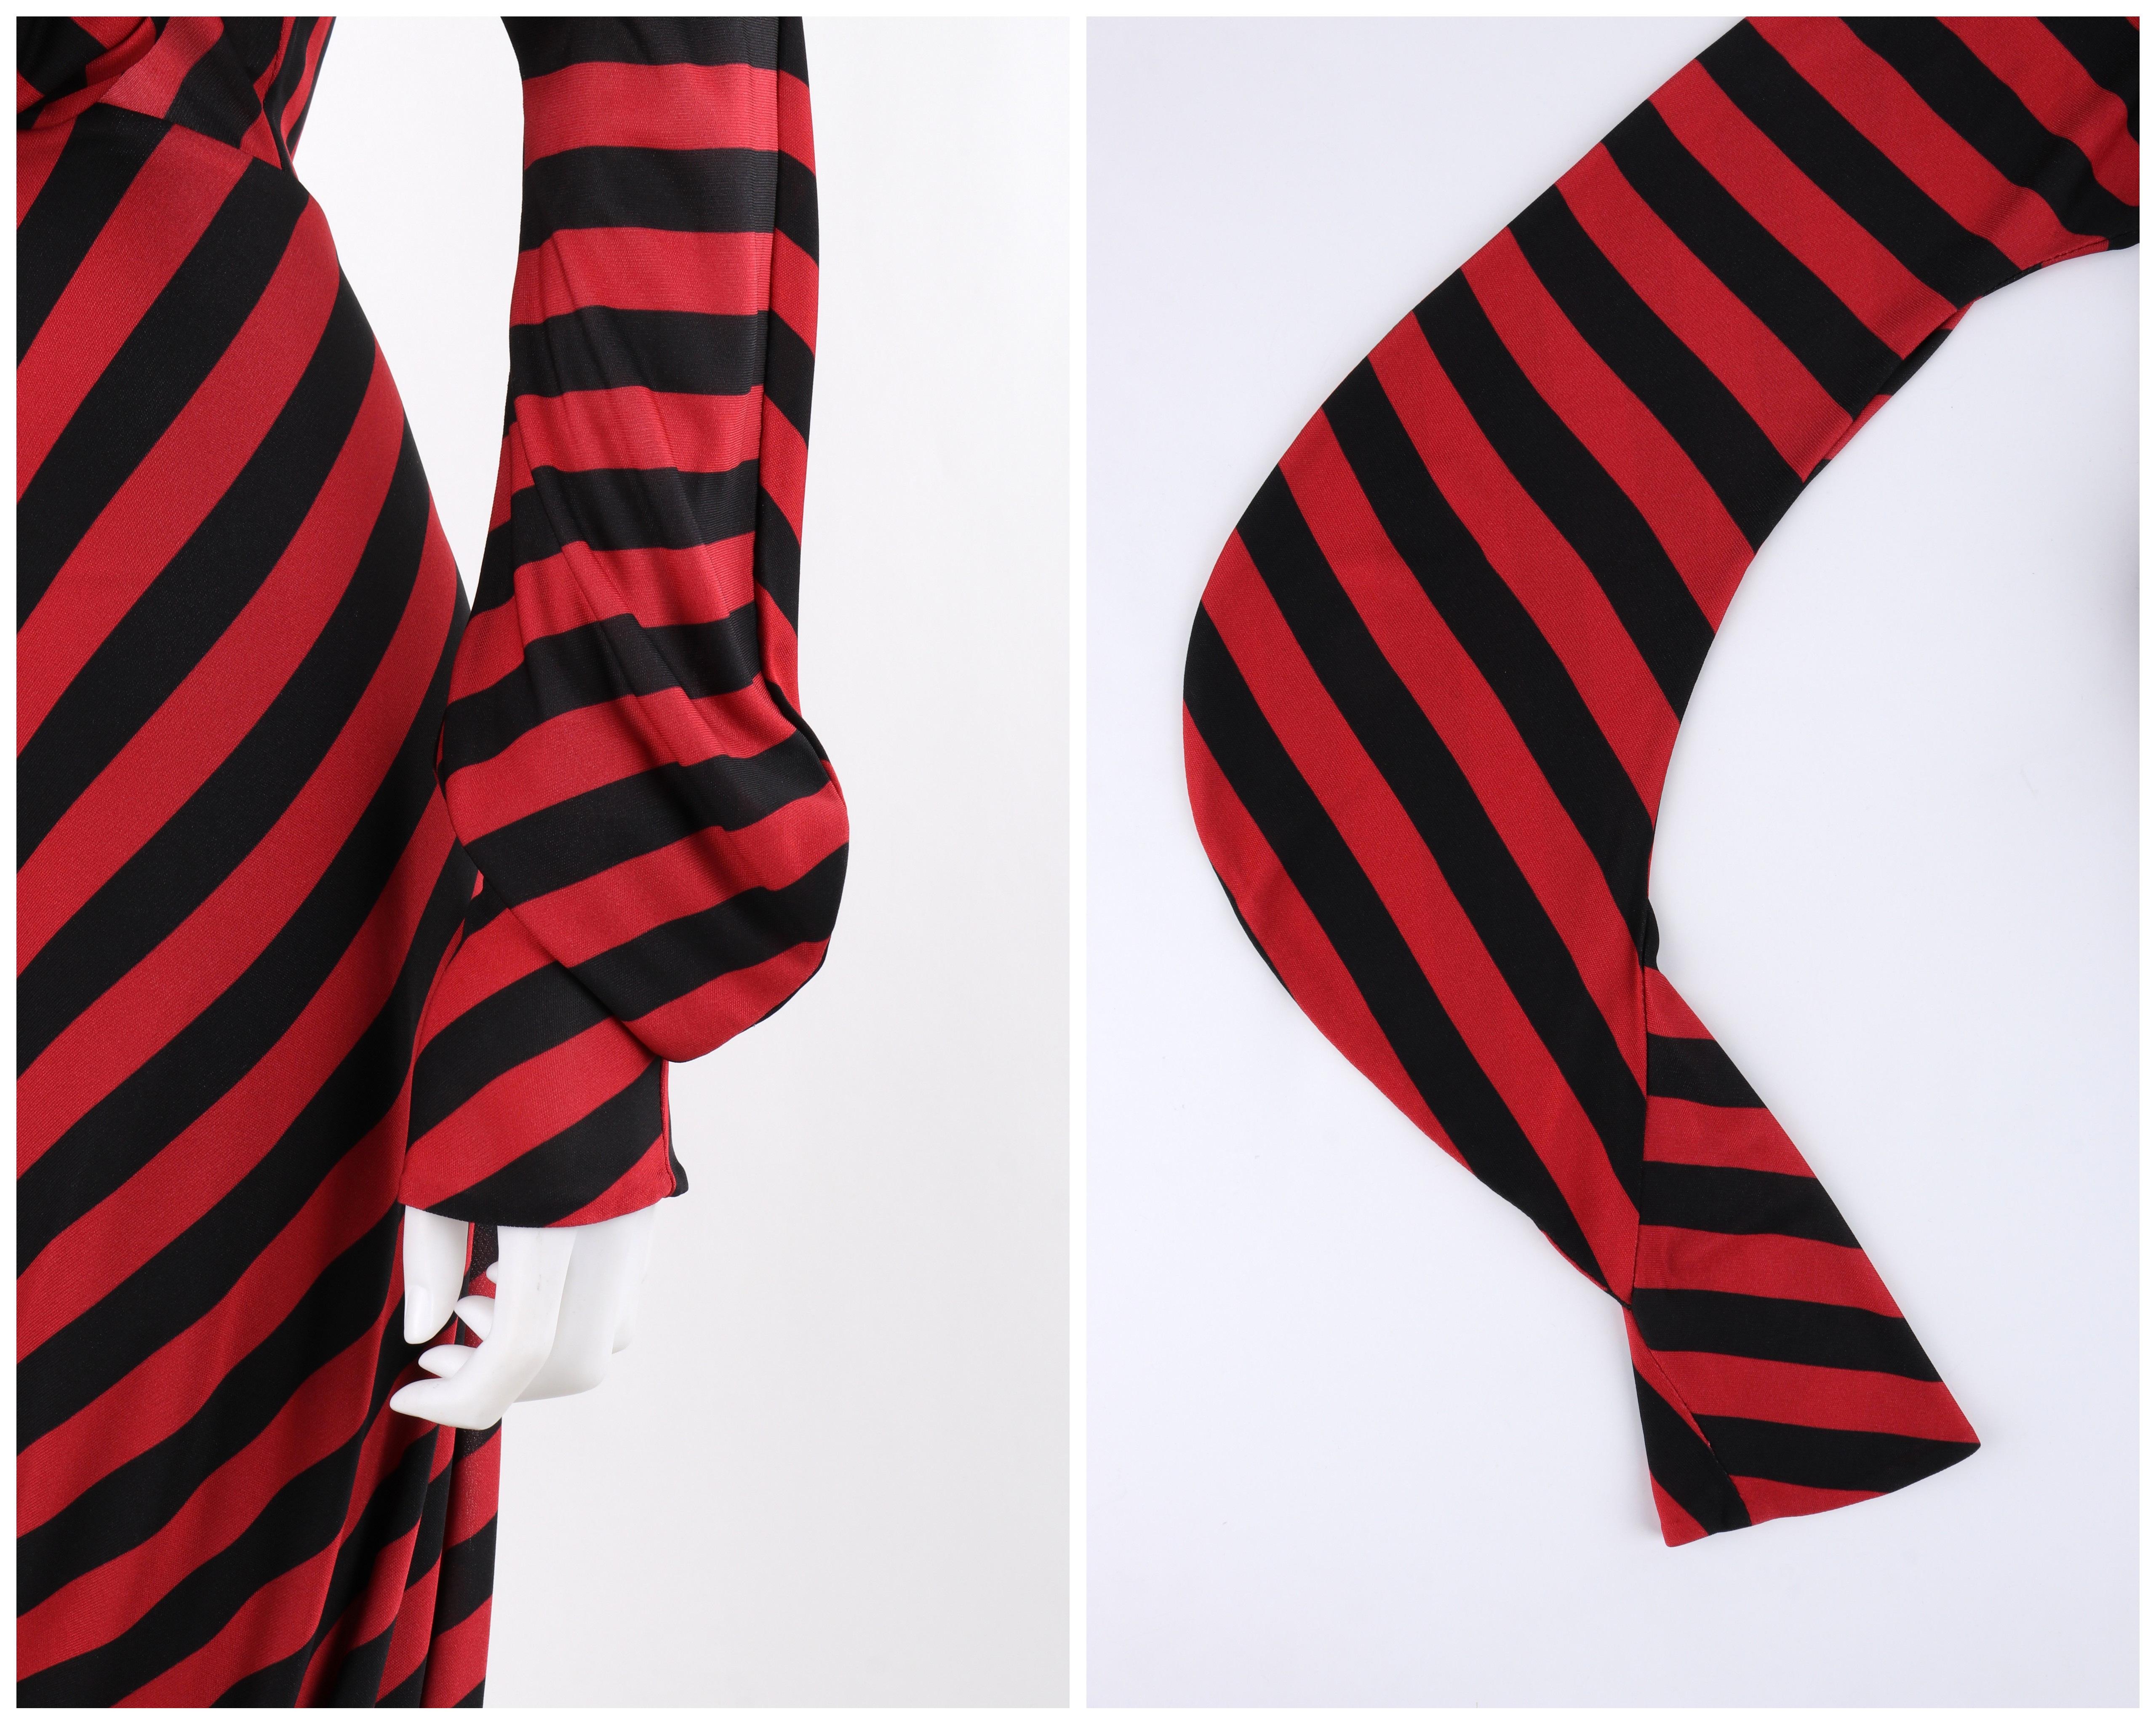 ALEXANDER McQUEEN F/W 2009 “The Horn of Plenty” Red Black Chevron Ruched Dress For Sale 3